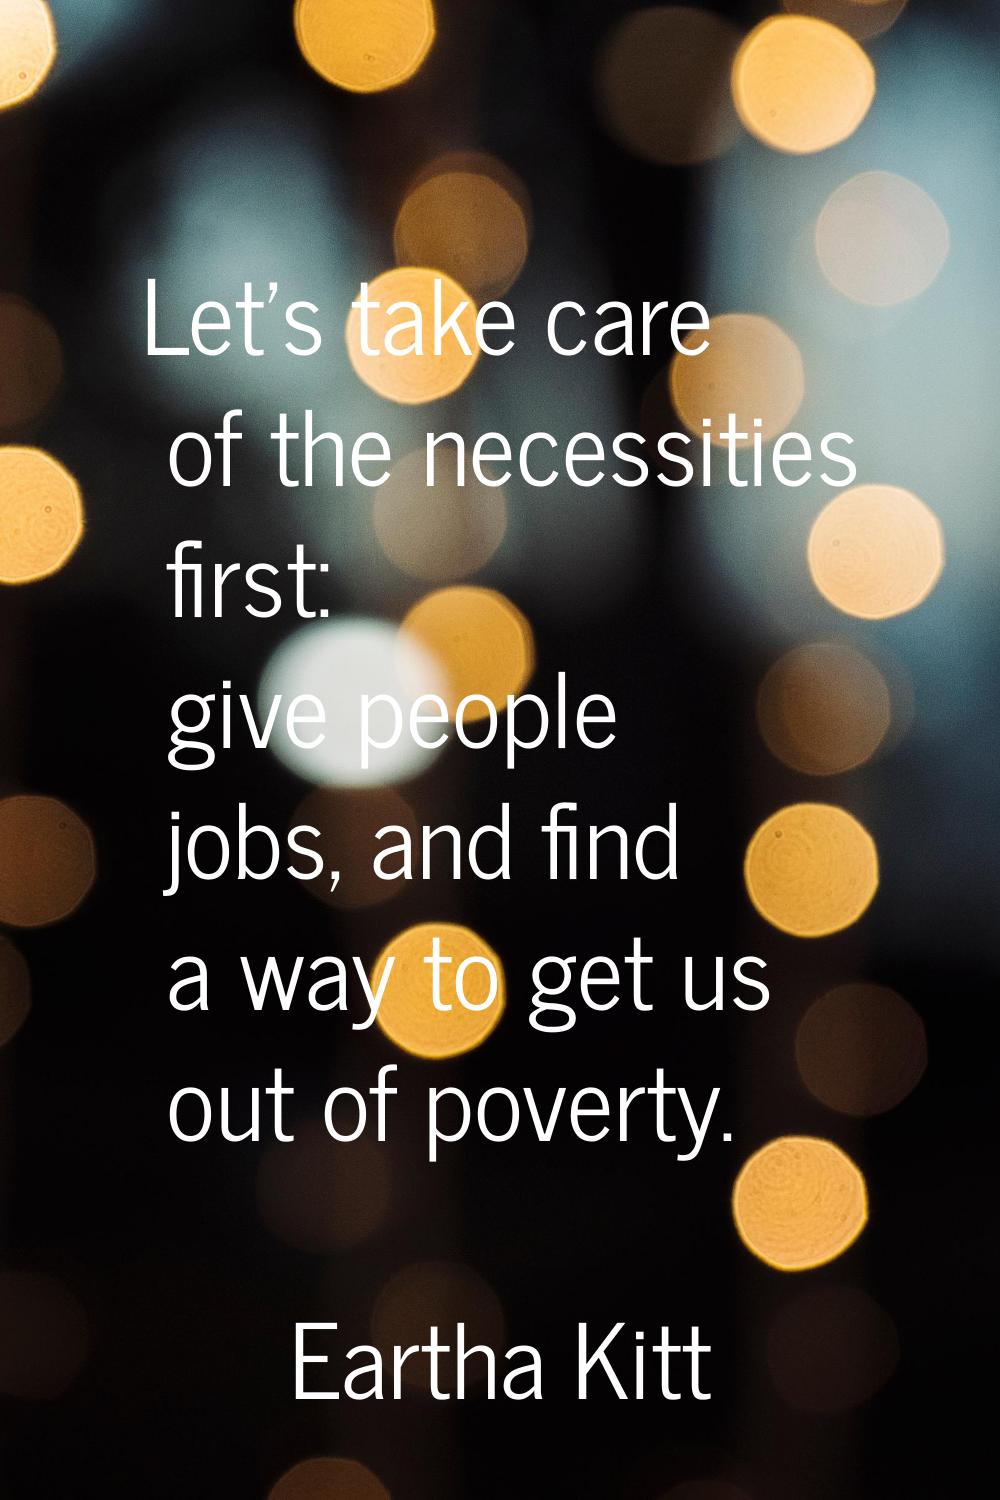 Let's take care of the necessities first: give people jobs, and find a way to get us out of poverty